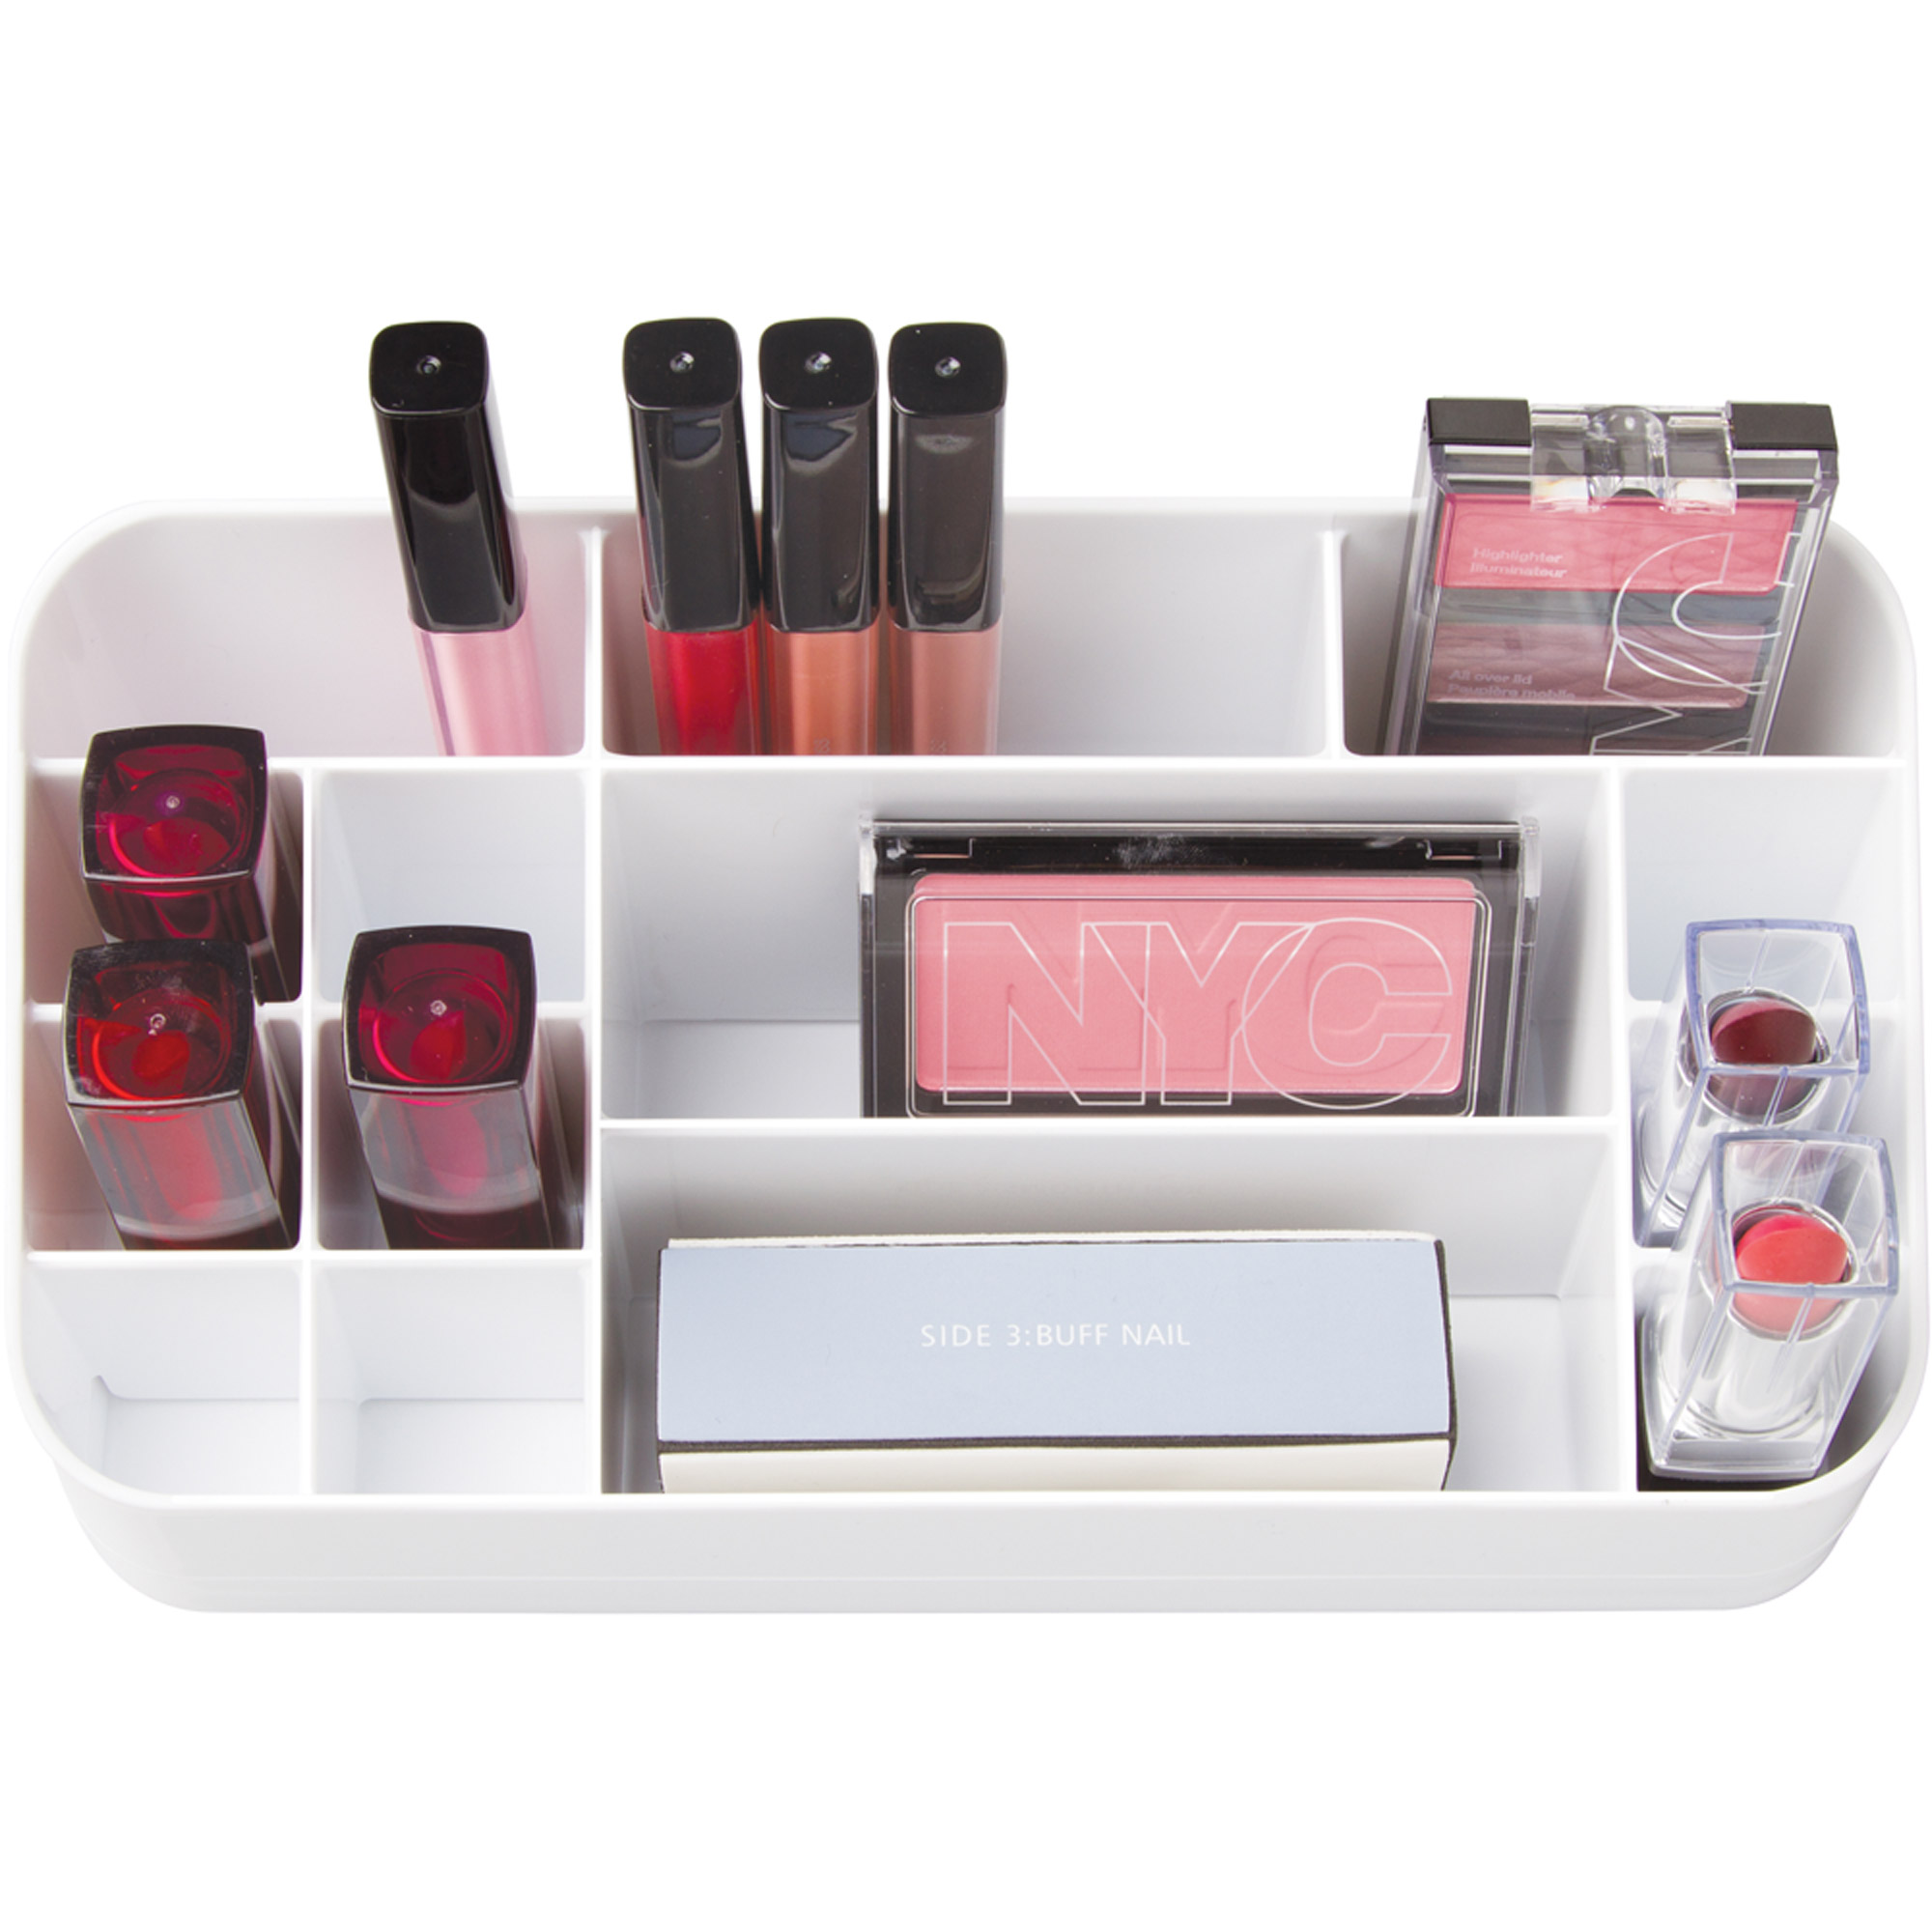 iDesign Clarity Cosmetic Organizer for Vanity Cabinet to Hold Makeup, Beauty Products, Lip Sticks, White - image 5 of 6